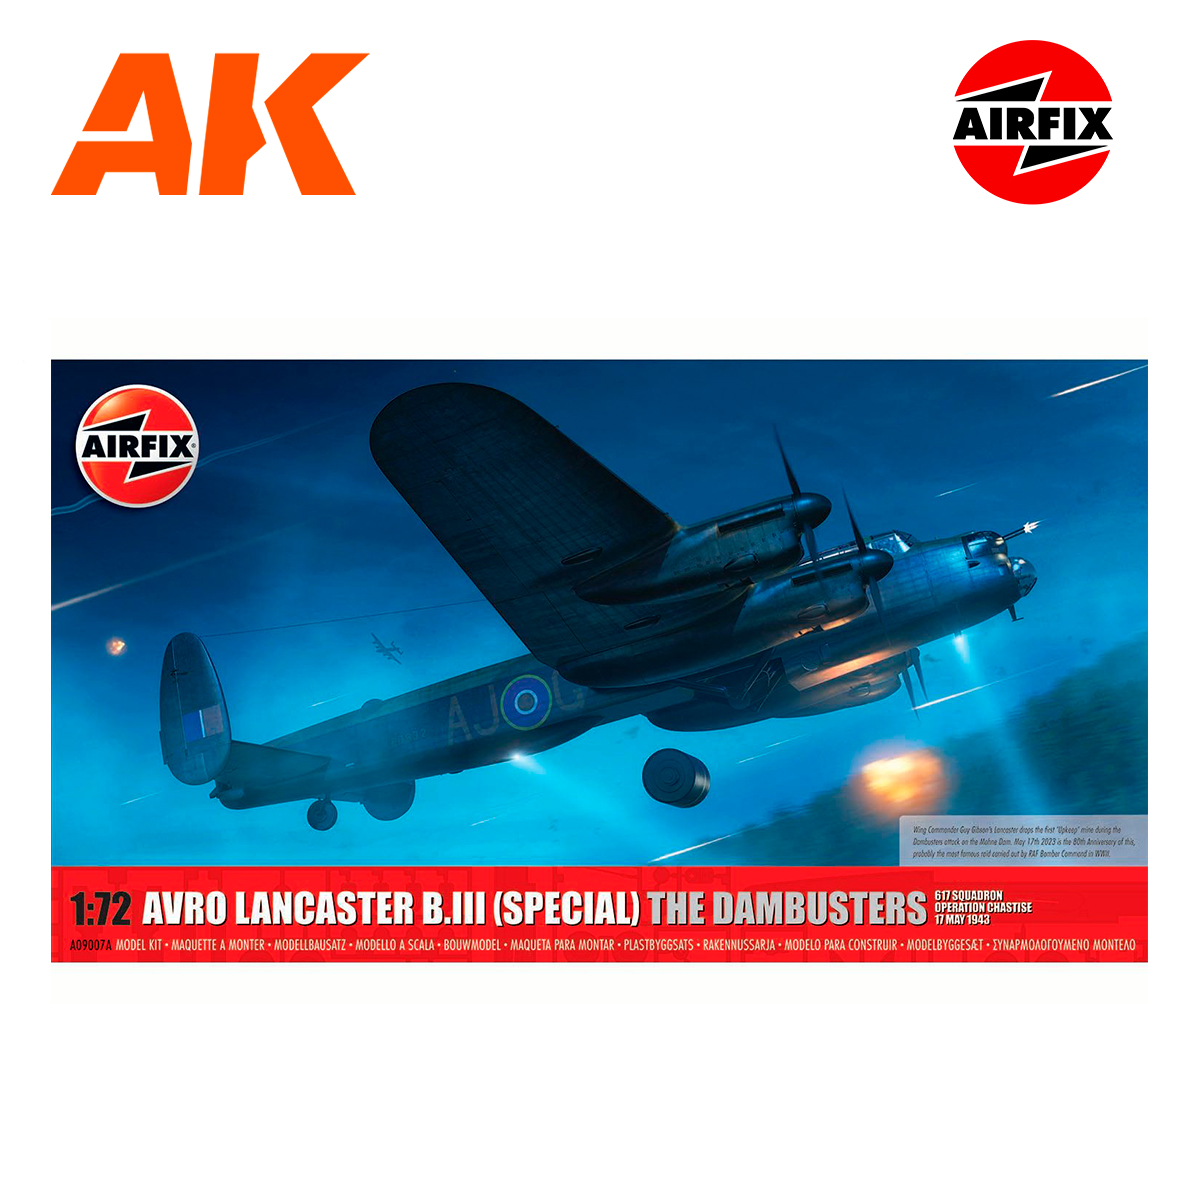 Avro Lancaster B.III (SPECIAL) ‘THE DAMBUSTERS’ 1/72